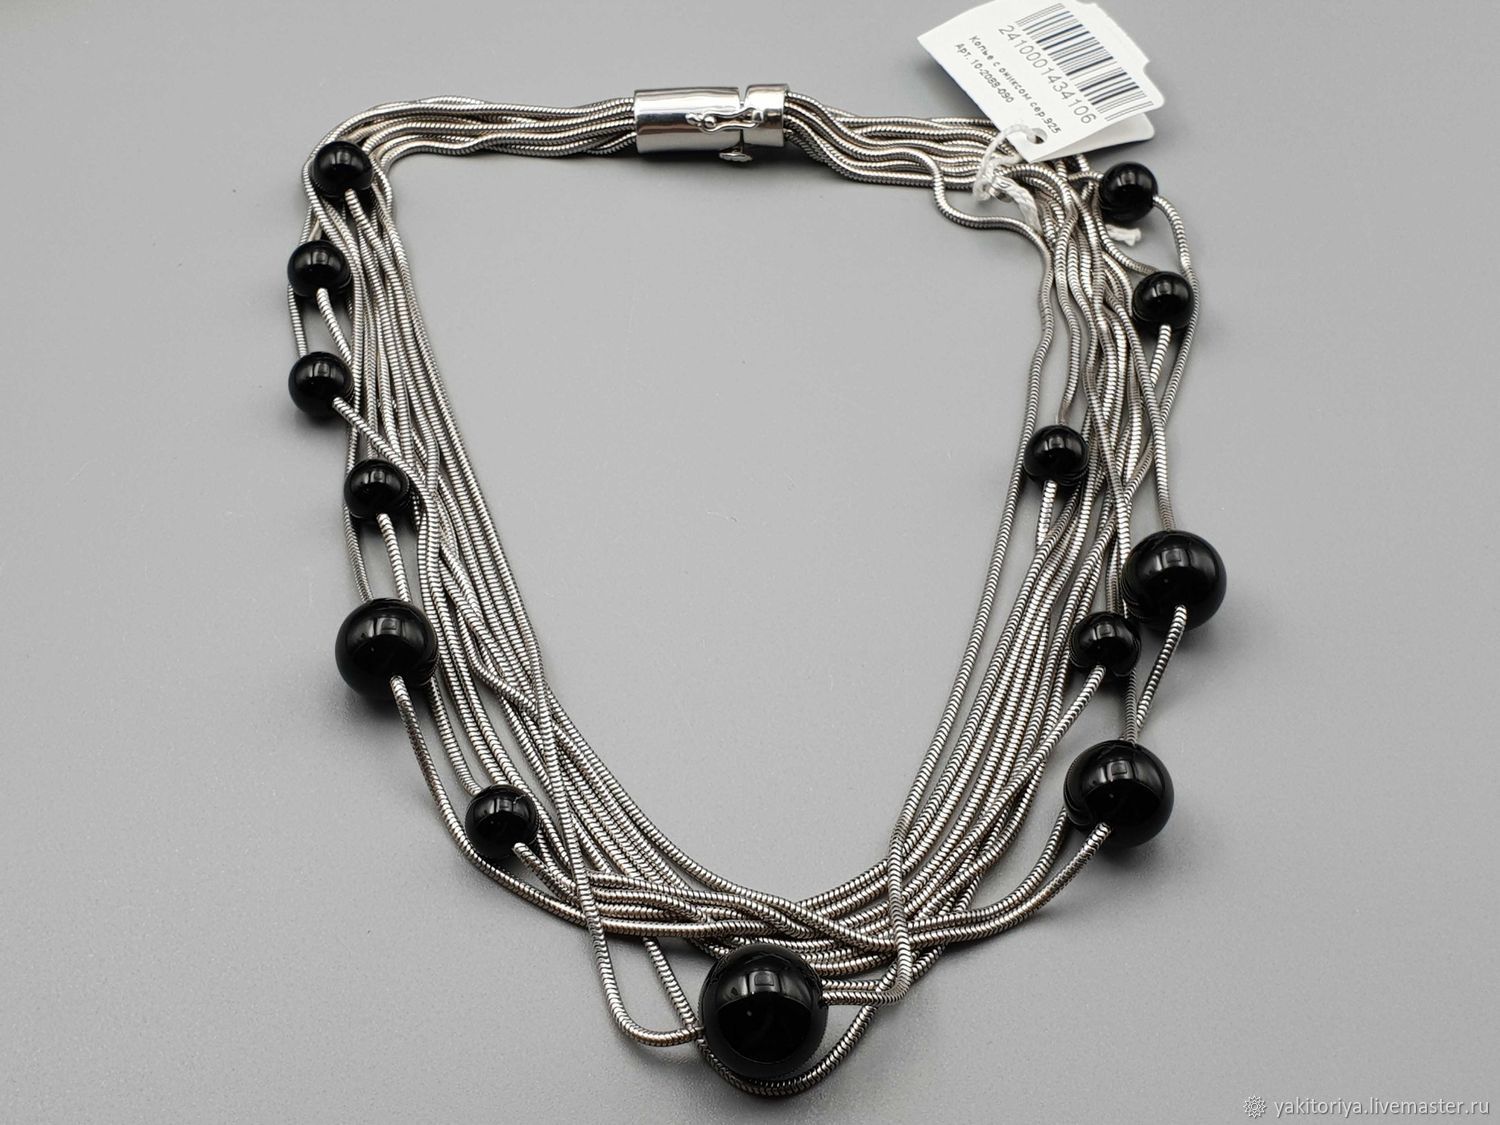 Silver necklace with black onyx beads, Necklace, Moscow,  Фото №1